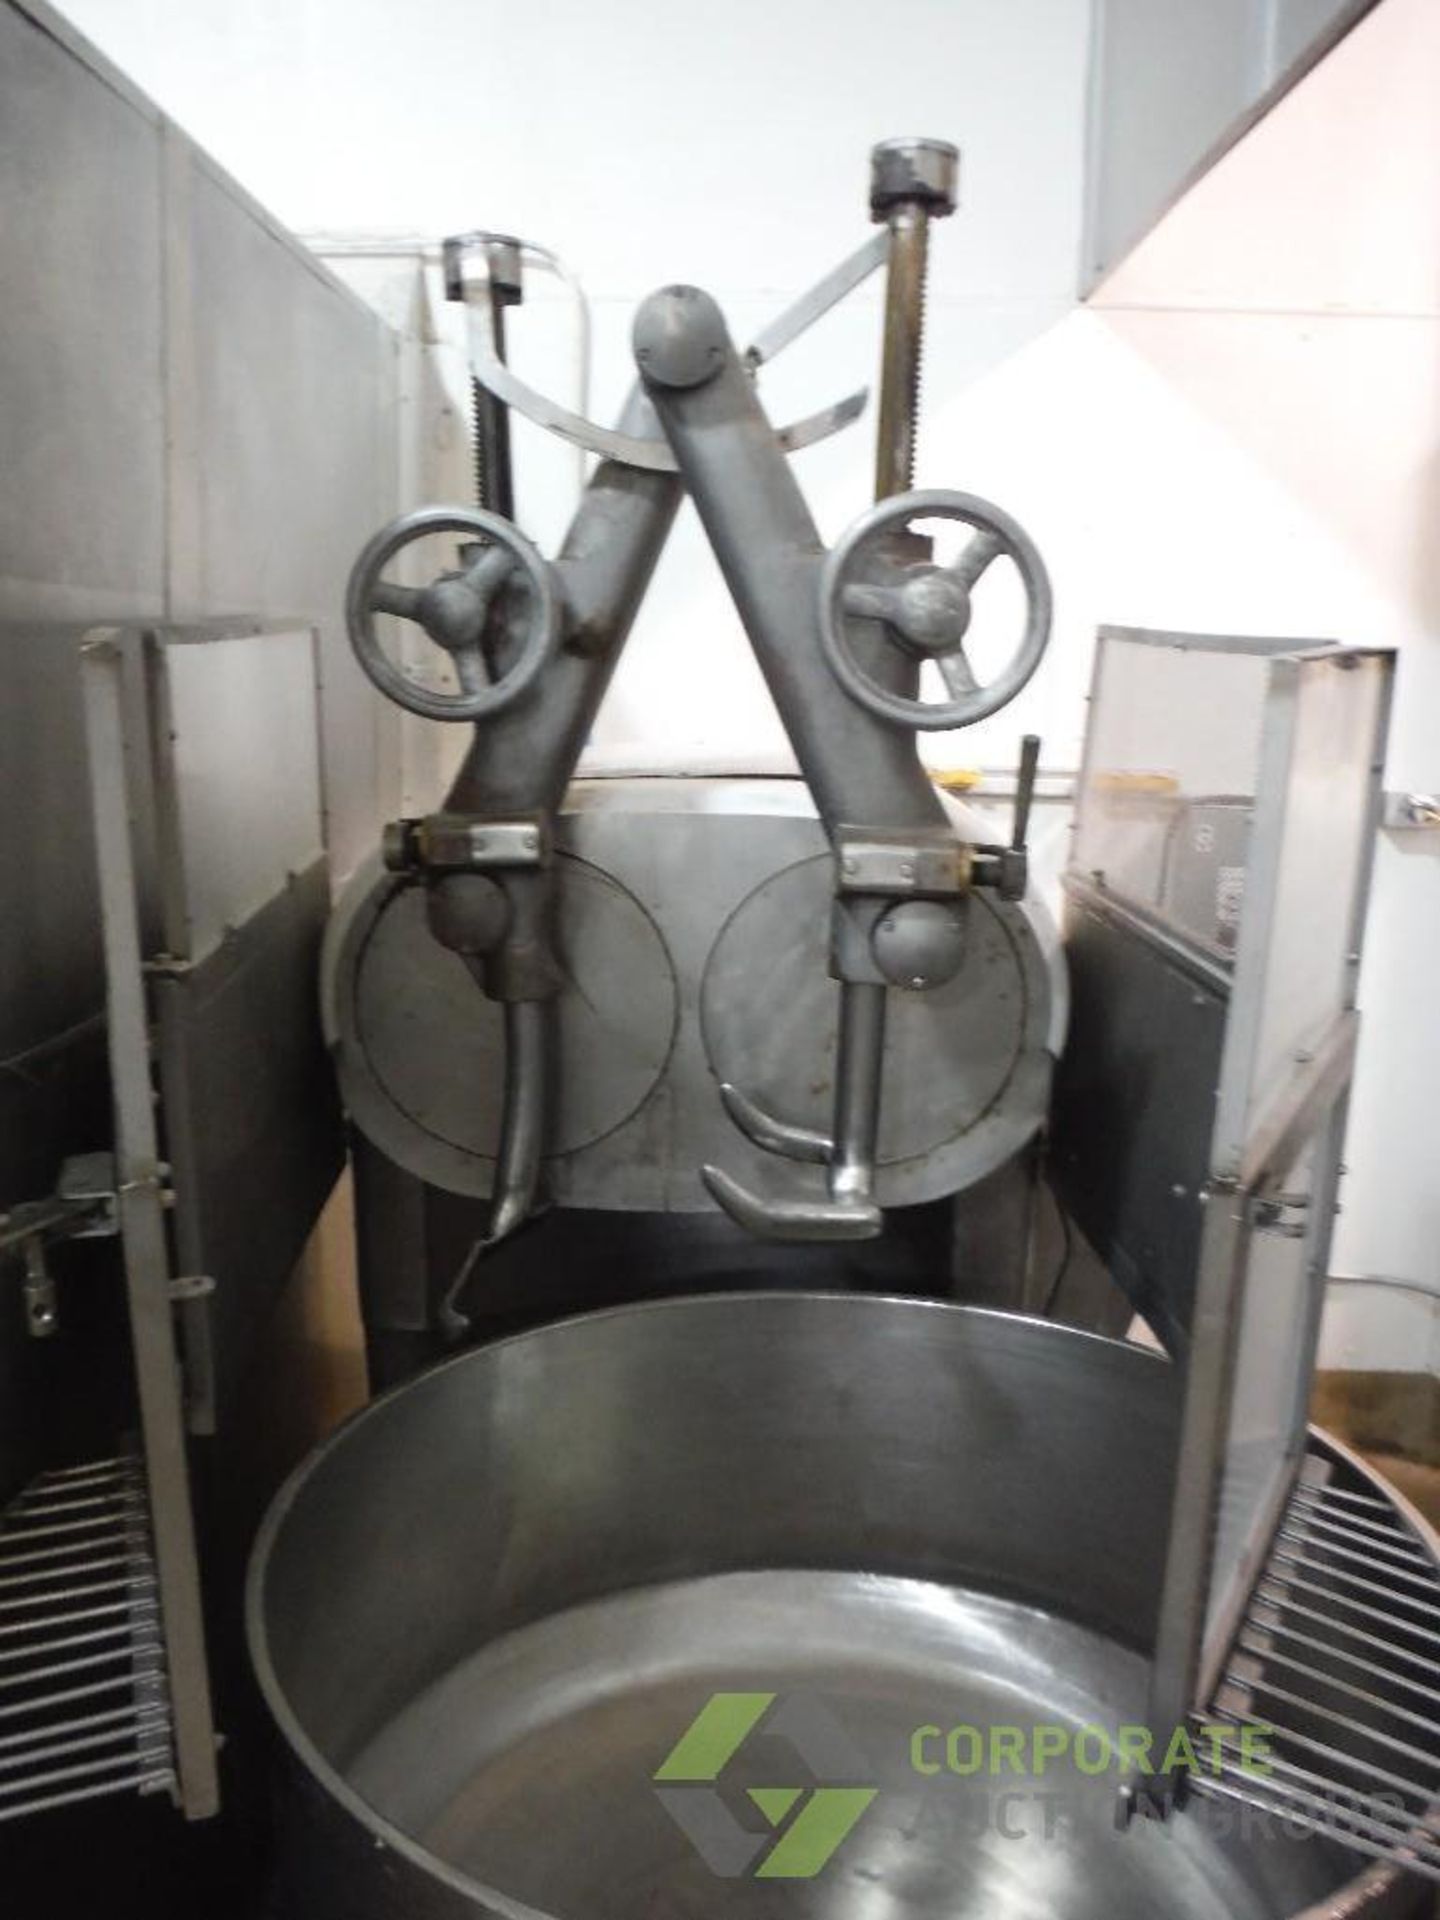 Colborne double arm mixer, Model DM530, SN 206-90, with SS mix bowl and cart, 44 in. dia. - Image 2 of 8